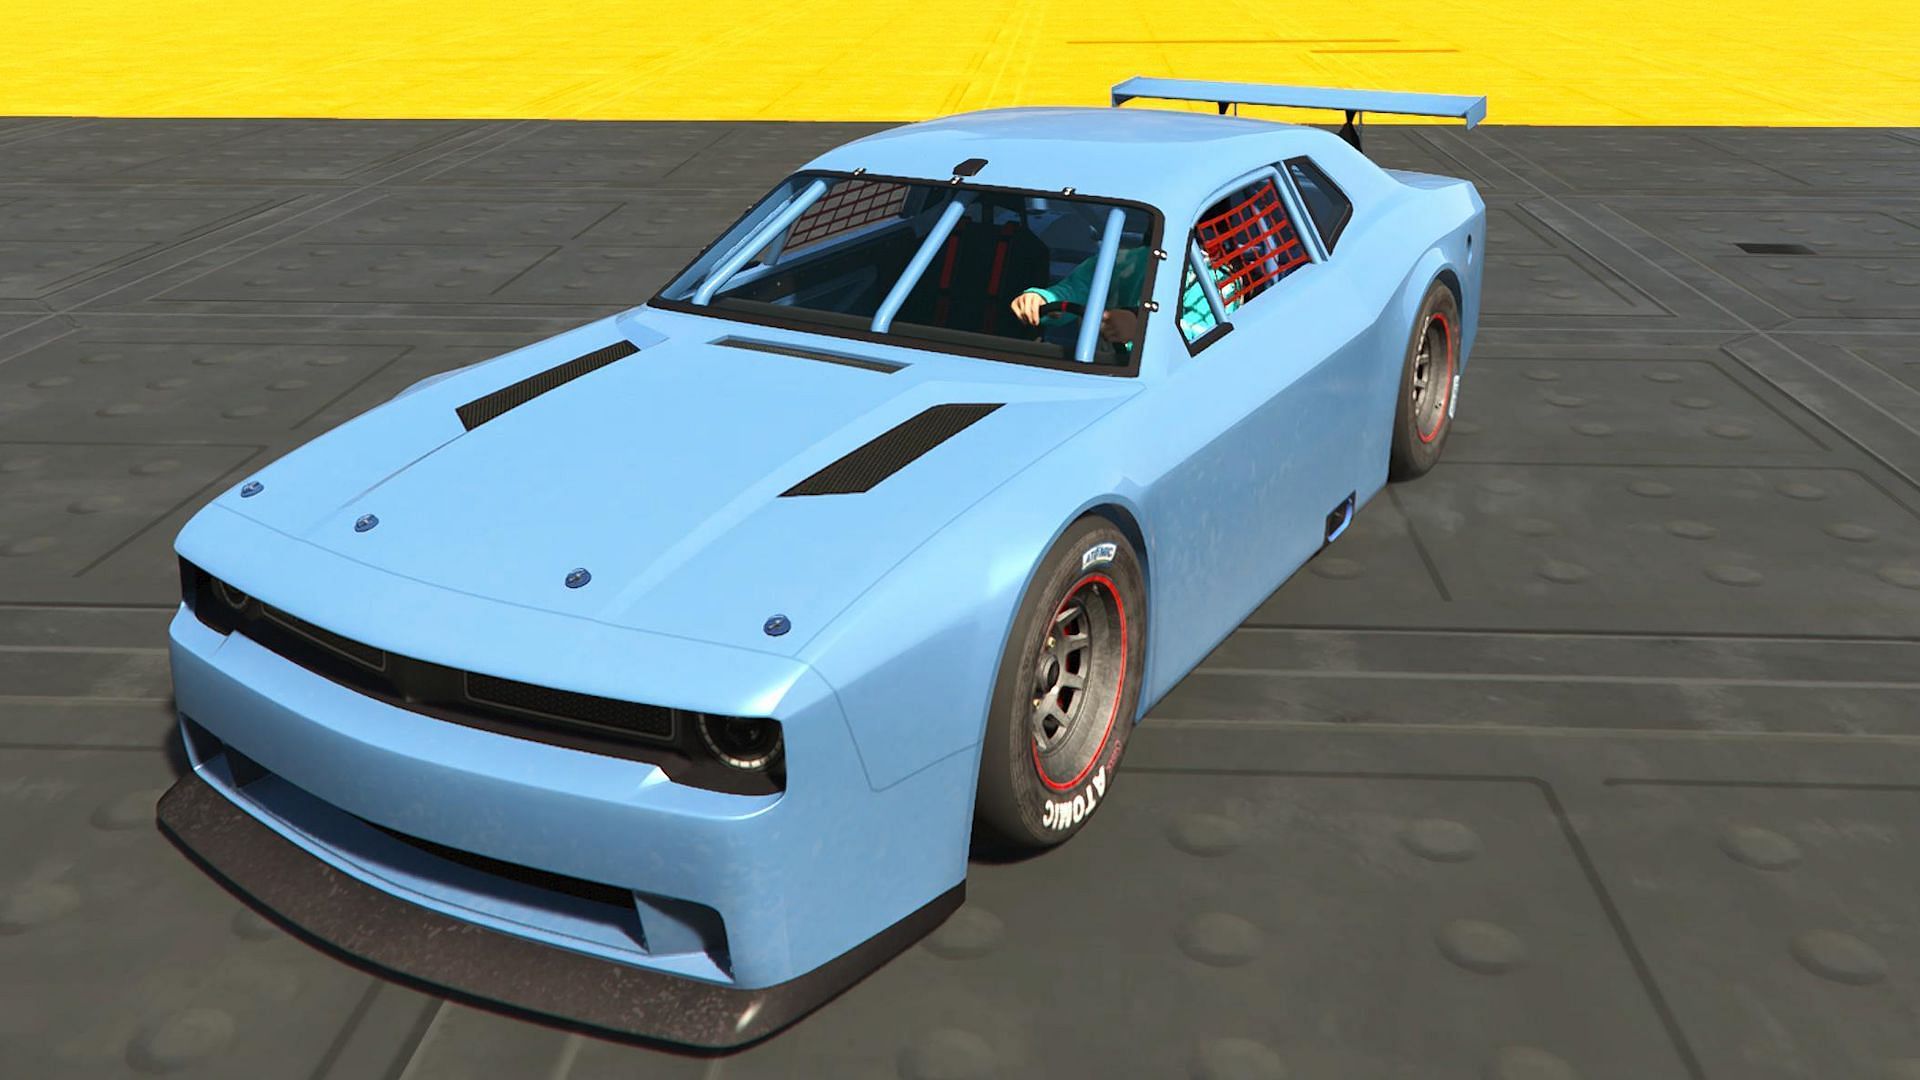 Another unreleased vehicle (Image via Rockstar Games)